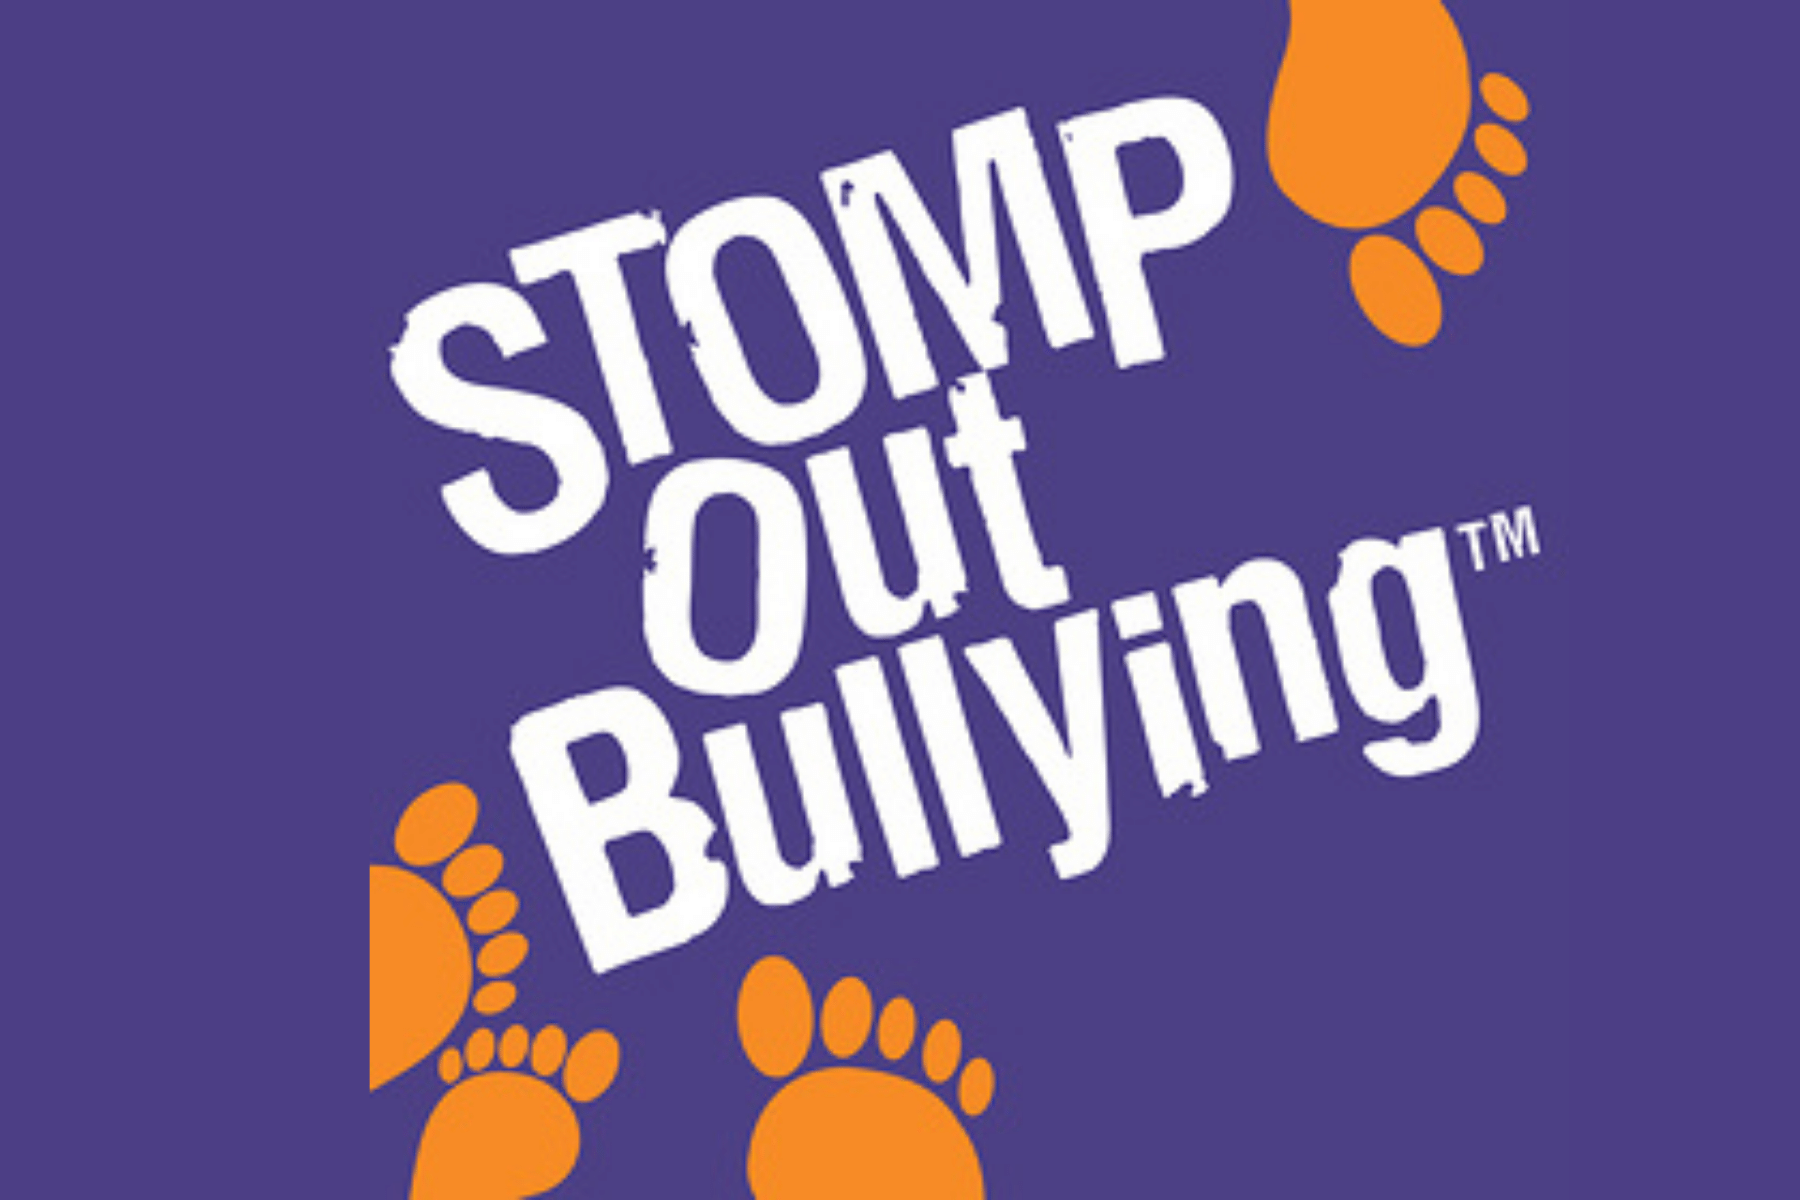 purple background with stomp out bullying in orange